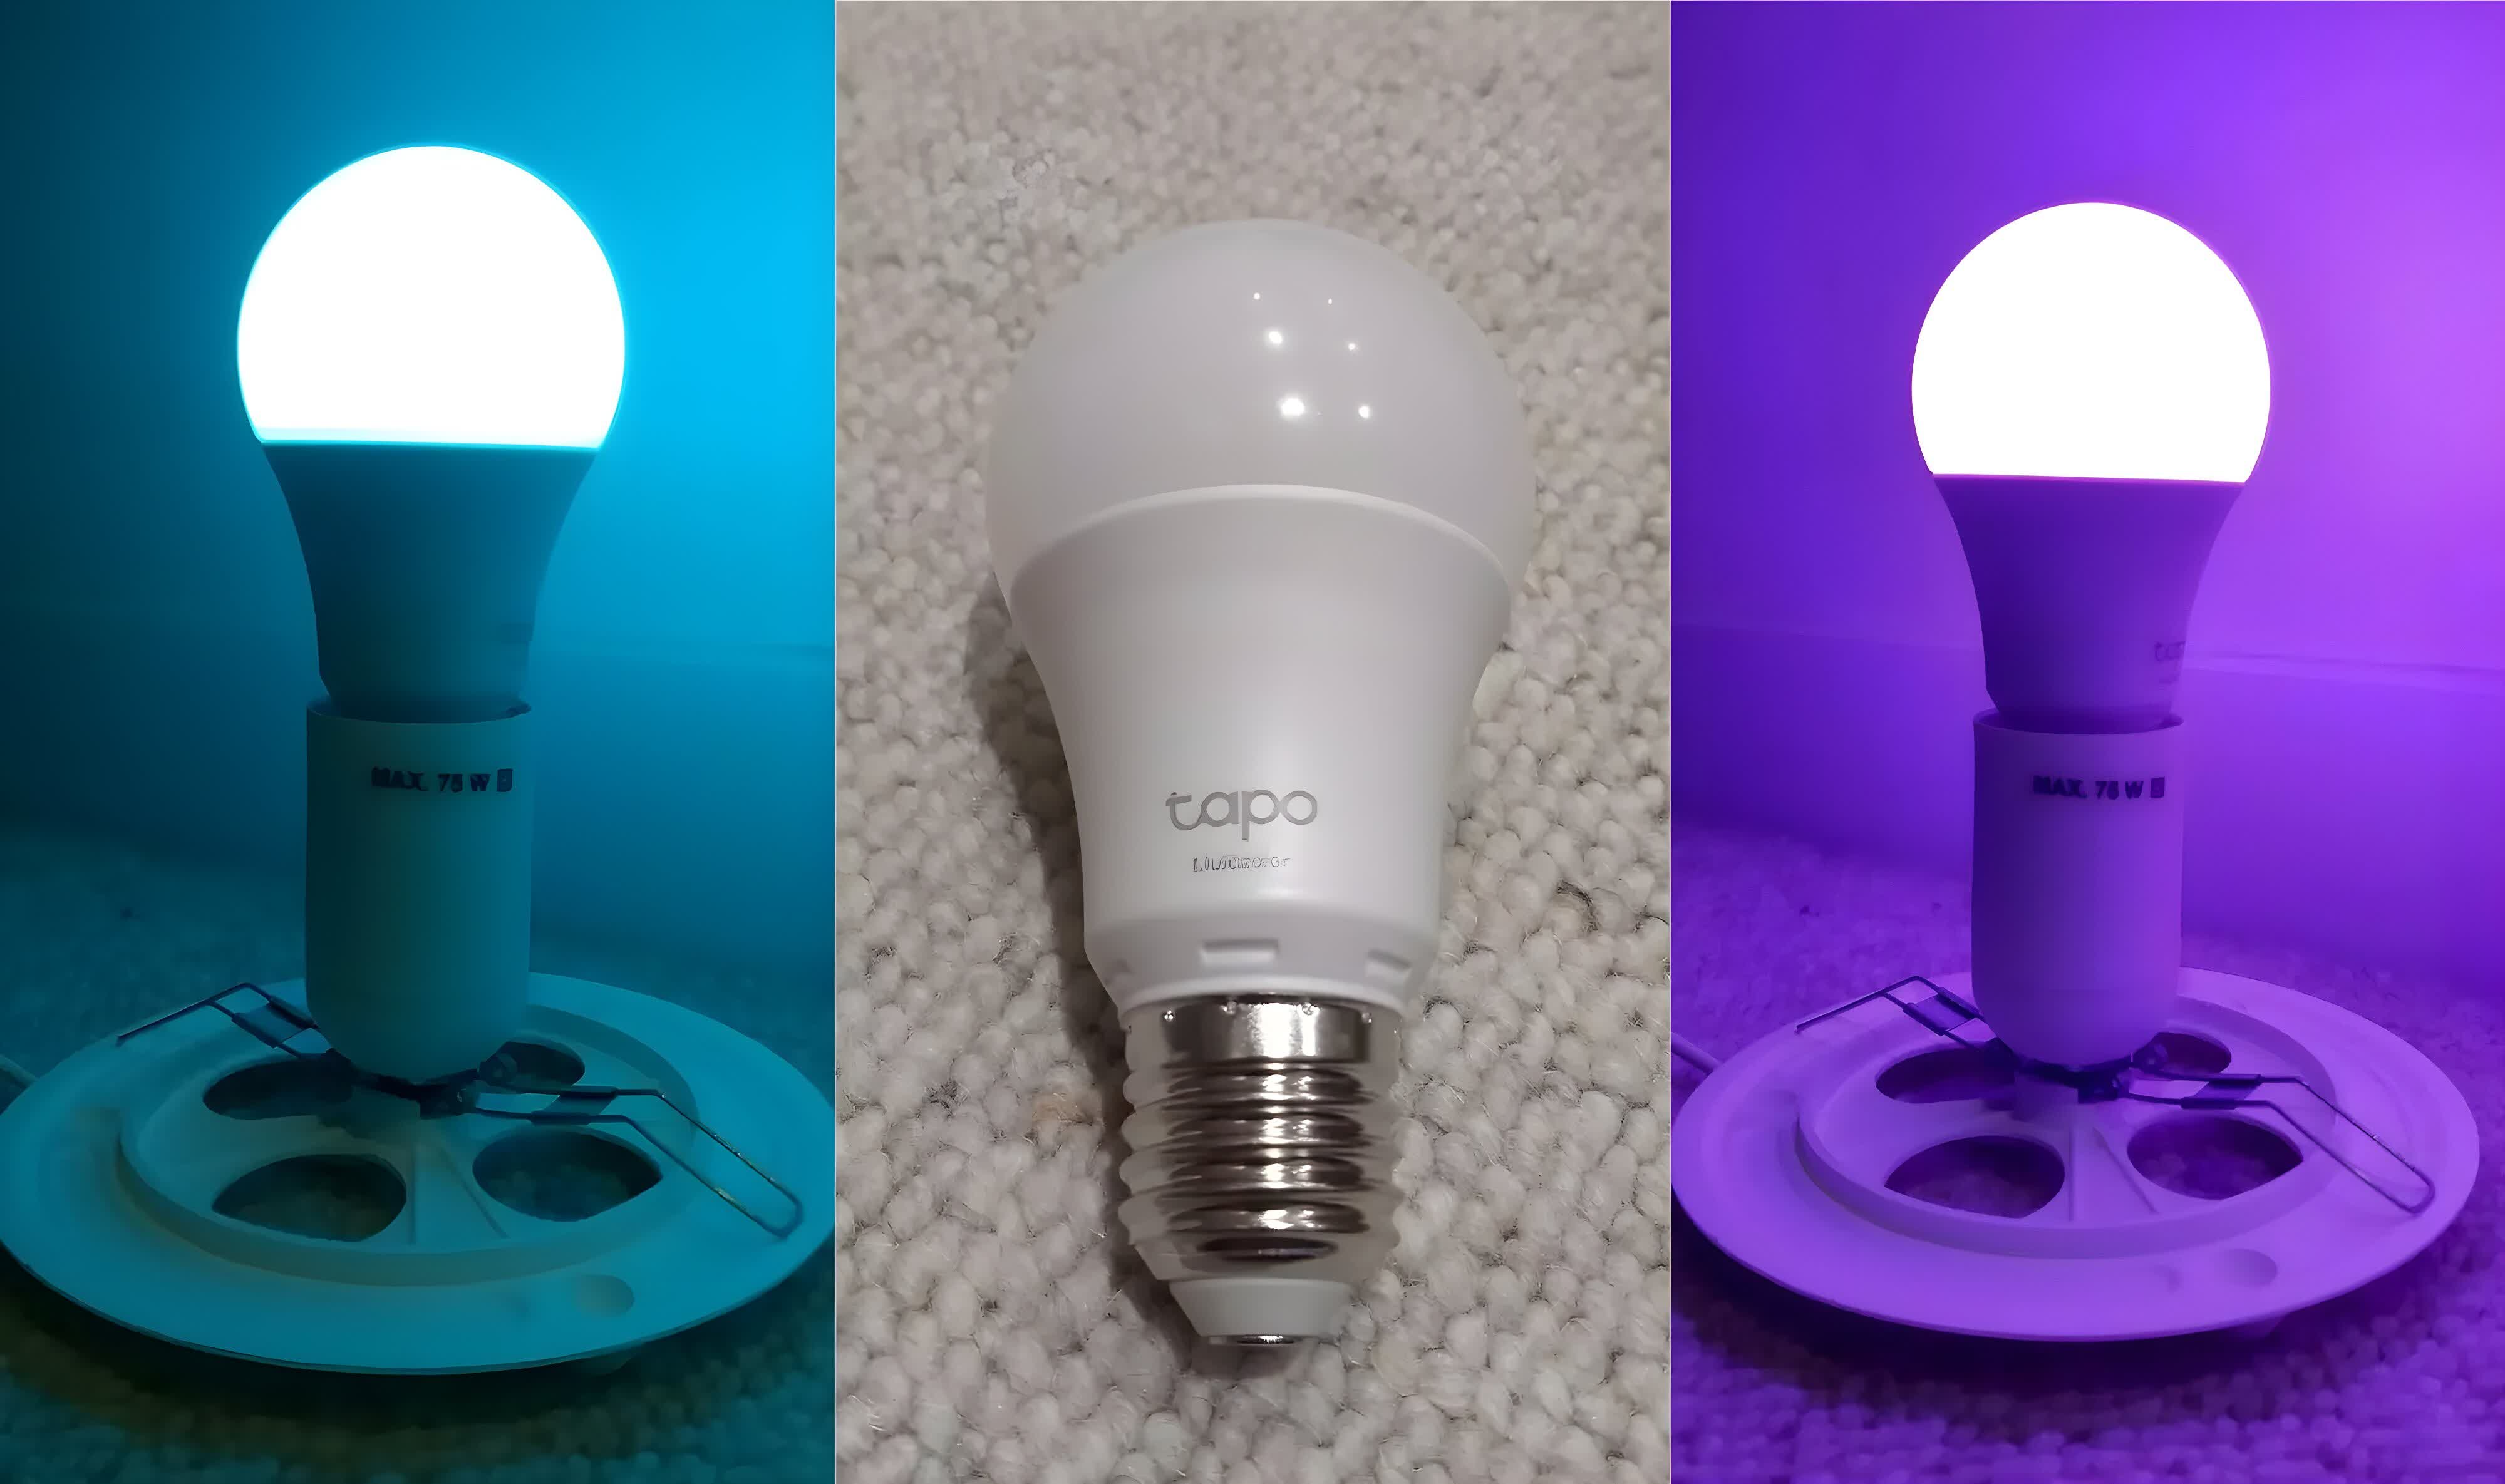 TP-Link Tapo smart bulb vulnerabilities could expose Wi-Fi passwords to attackers